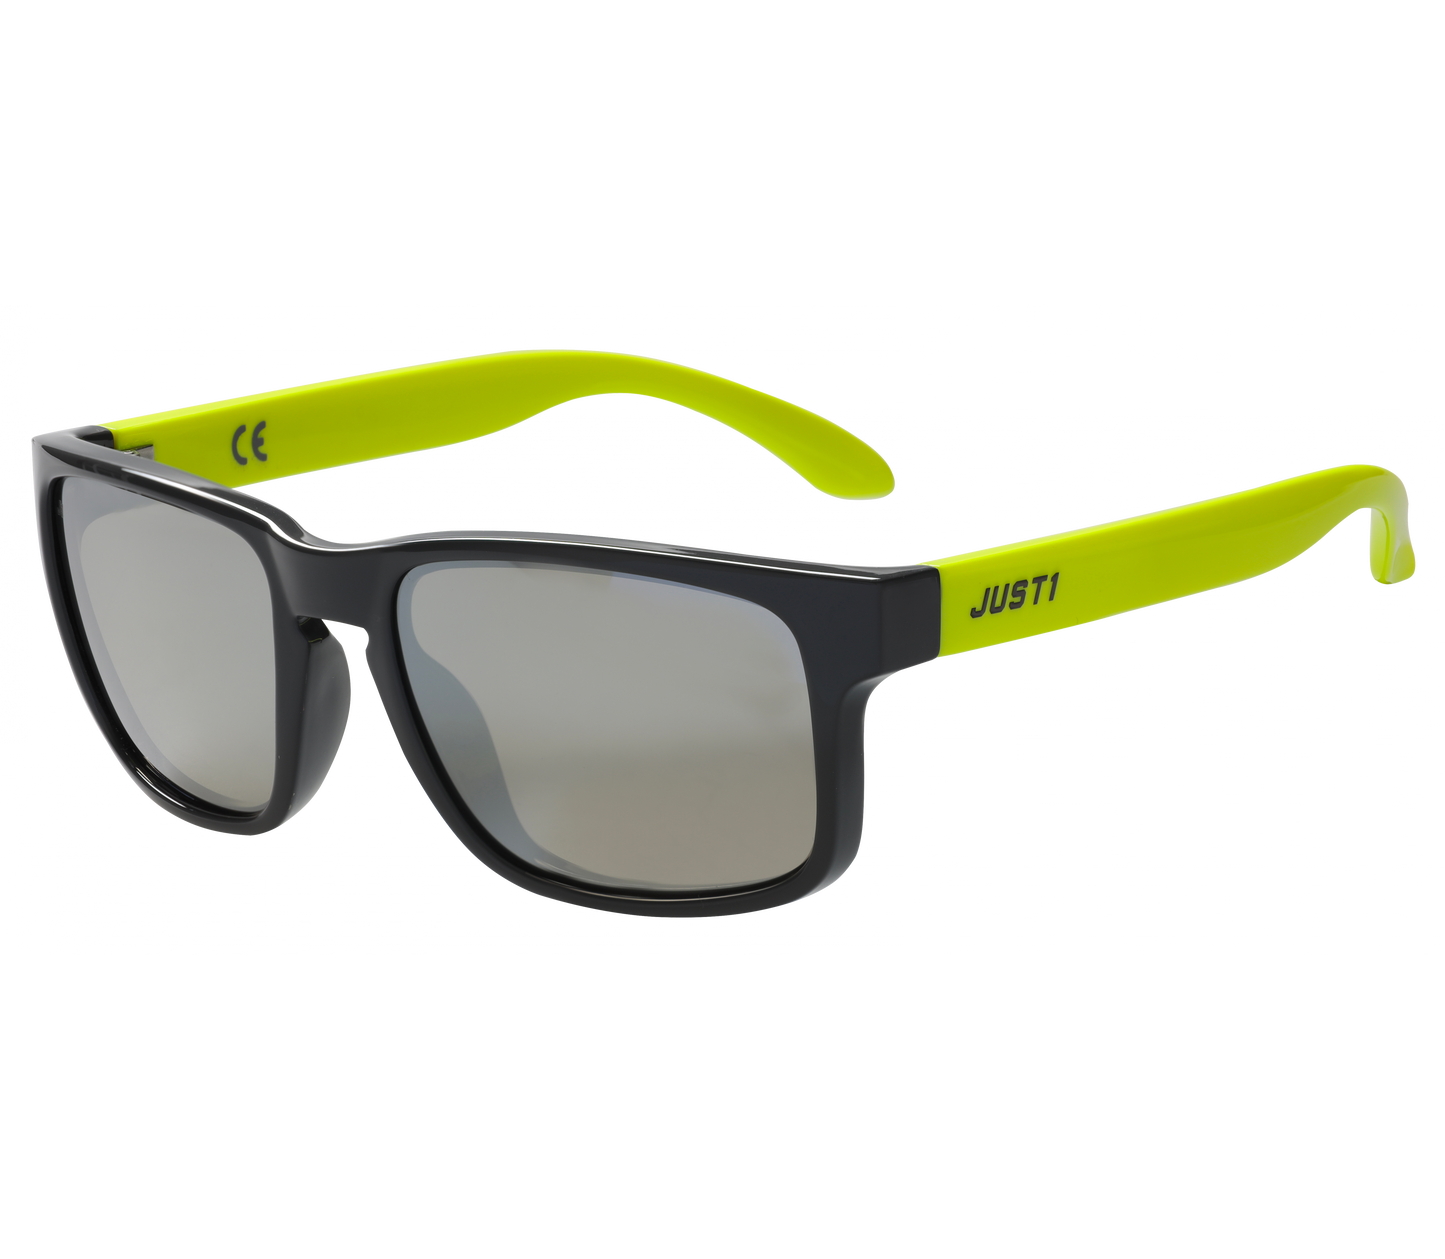 JUST1 KICKFLIP GREY/FLUO YELLOW with silver mirror lens